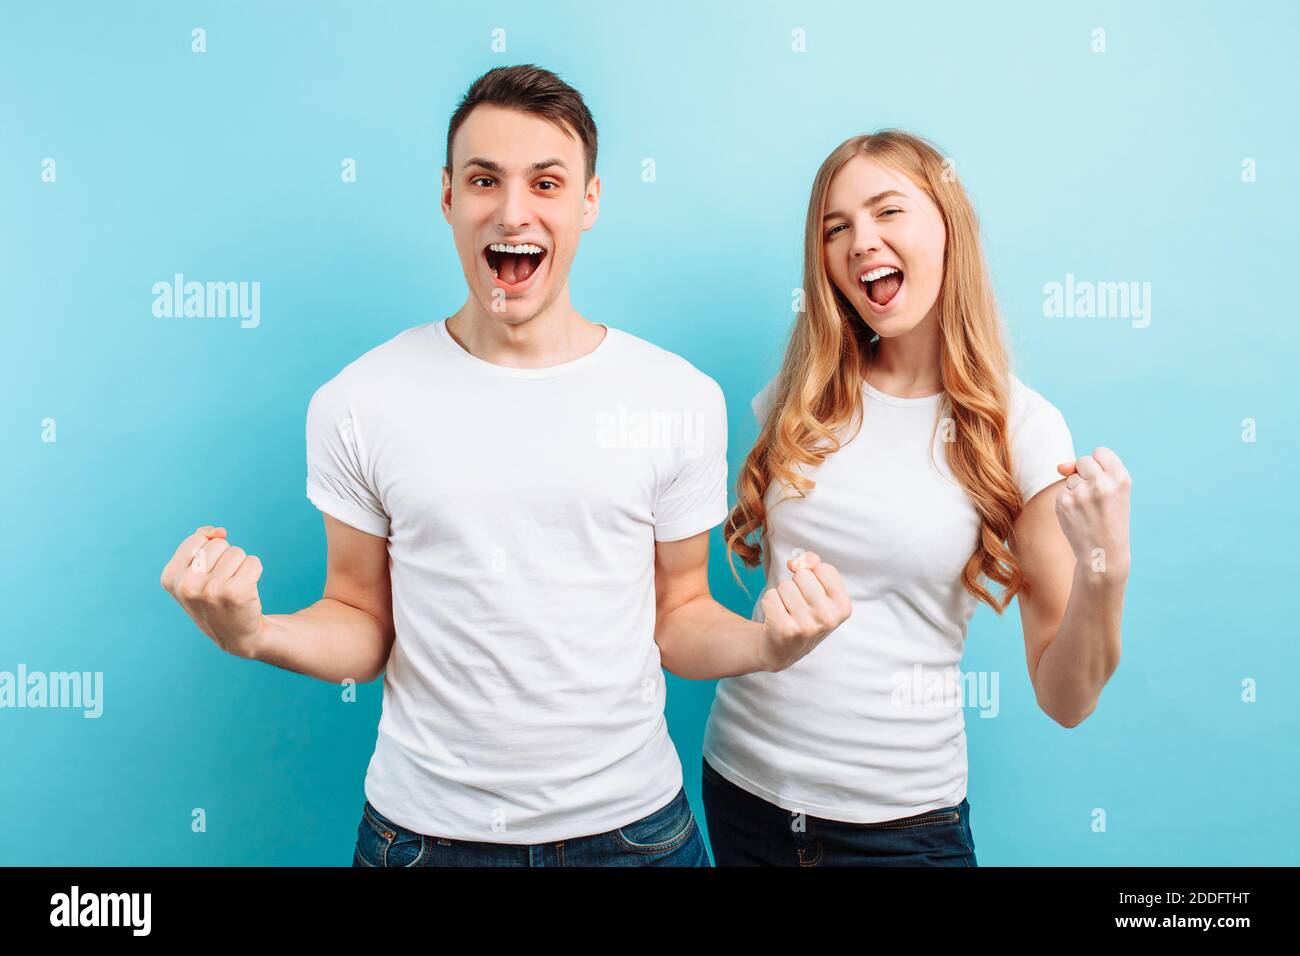 Portrait of an excited couple, a man and a woman in white t-shirts celebrating victory with fists raised, screaming, on a light blue background Stock Photo